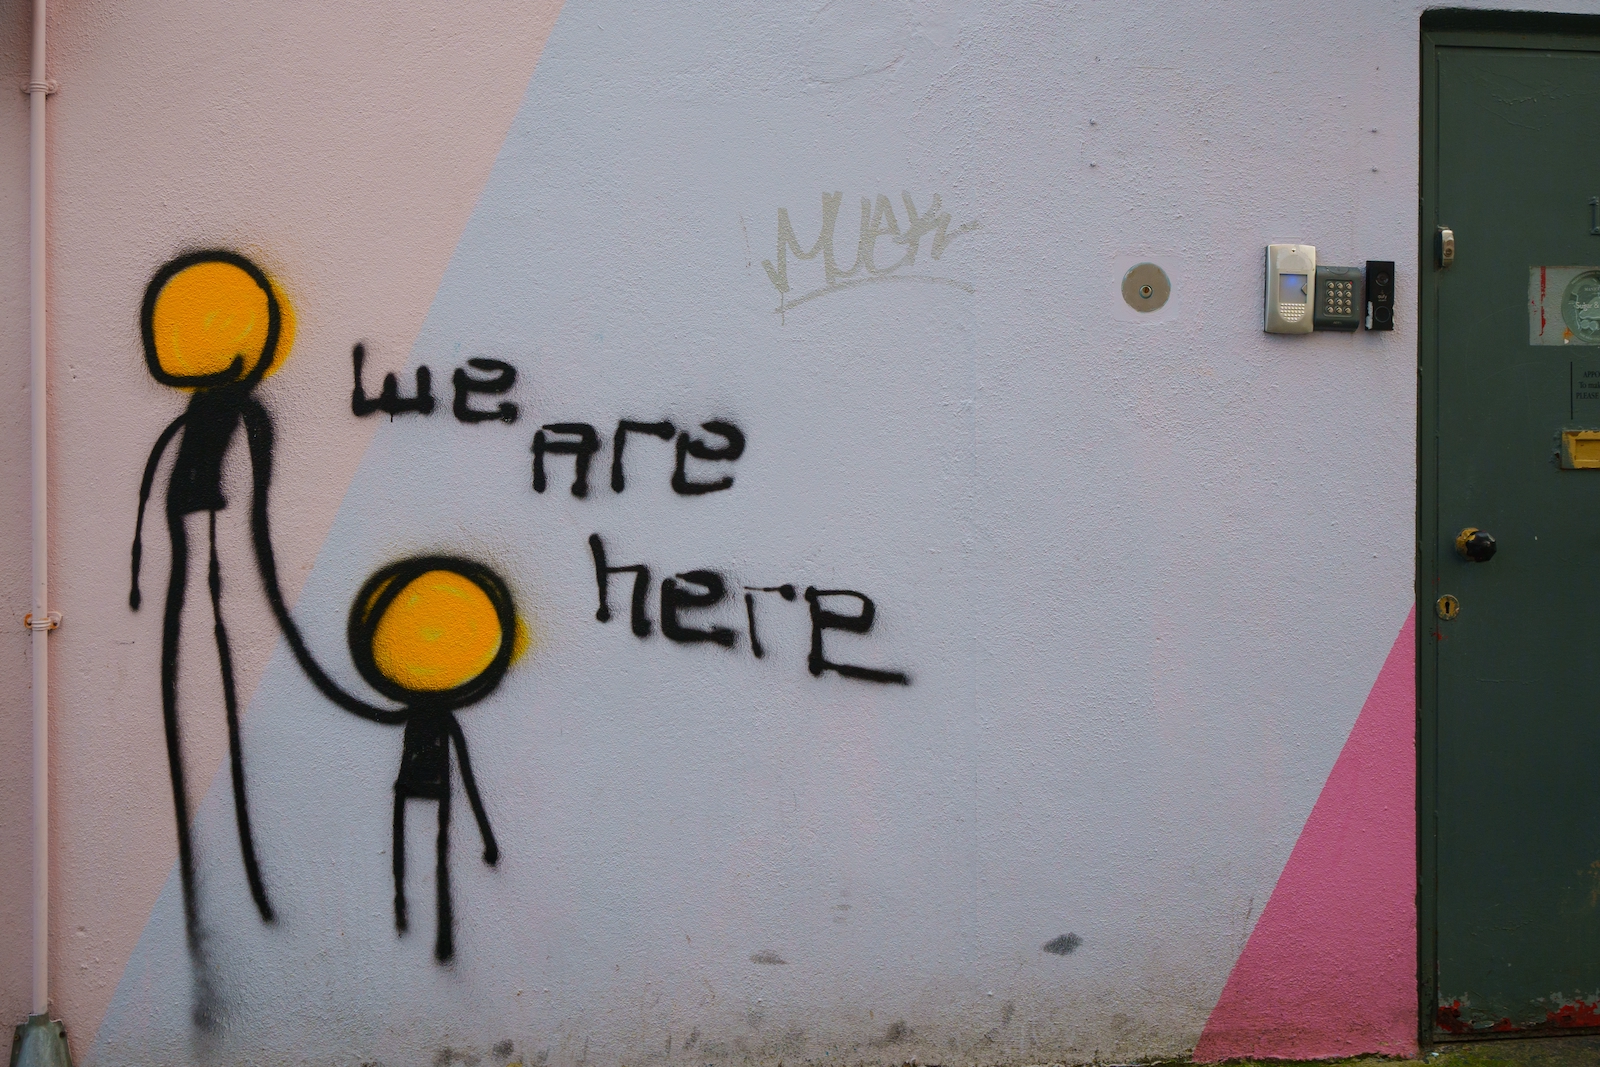 WE ARE HERE [URBAN EXPRESSION AT SWANVILLE PLACE IN RATHMINES]-227298-001